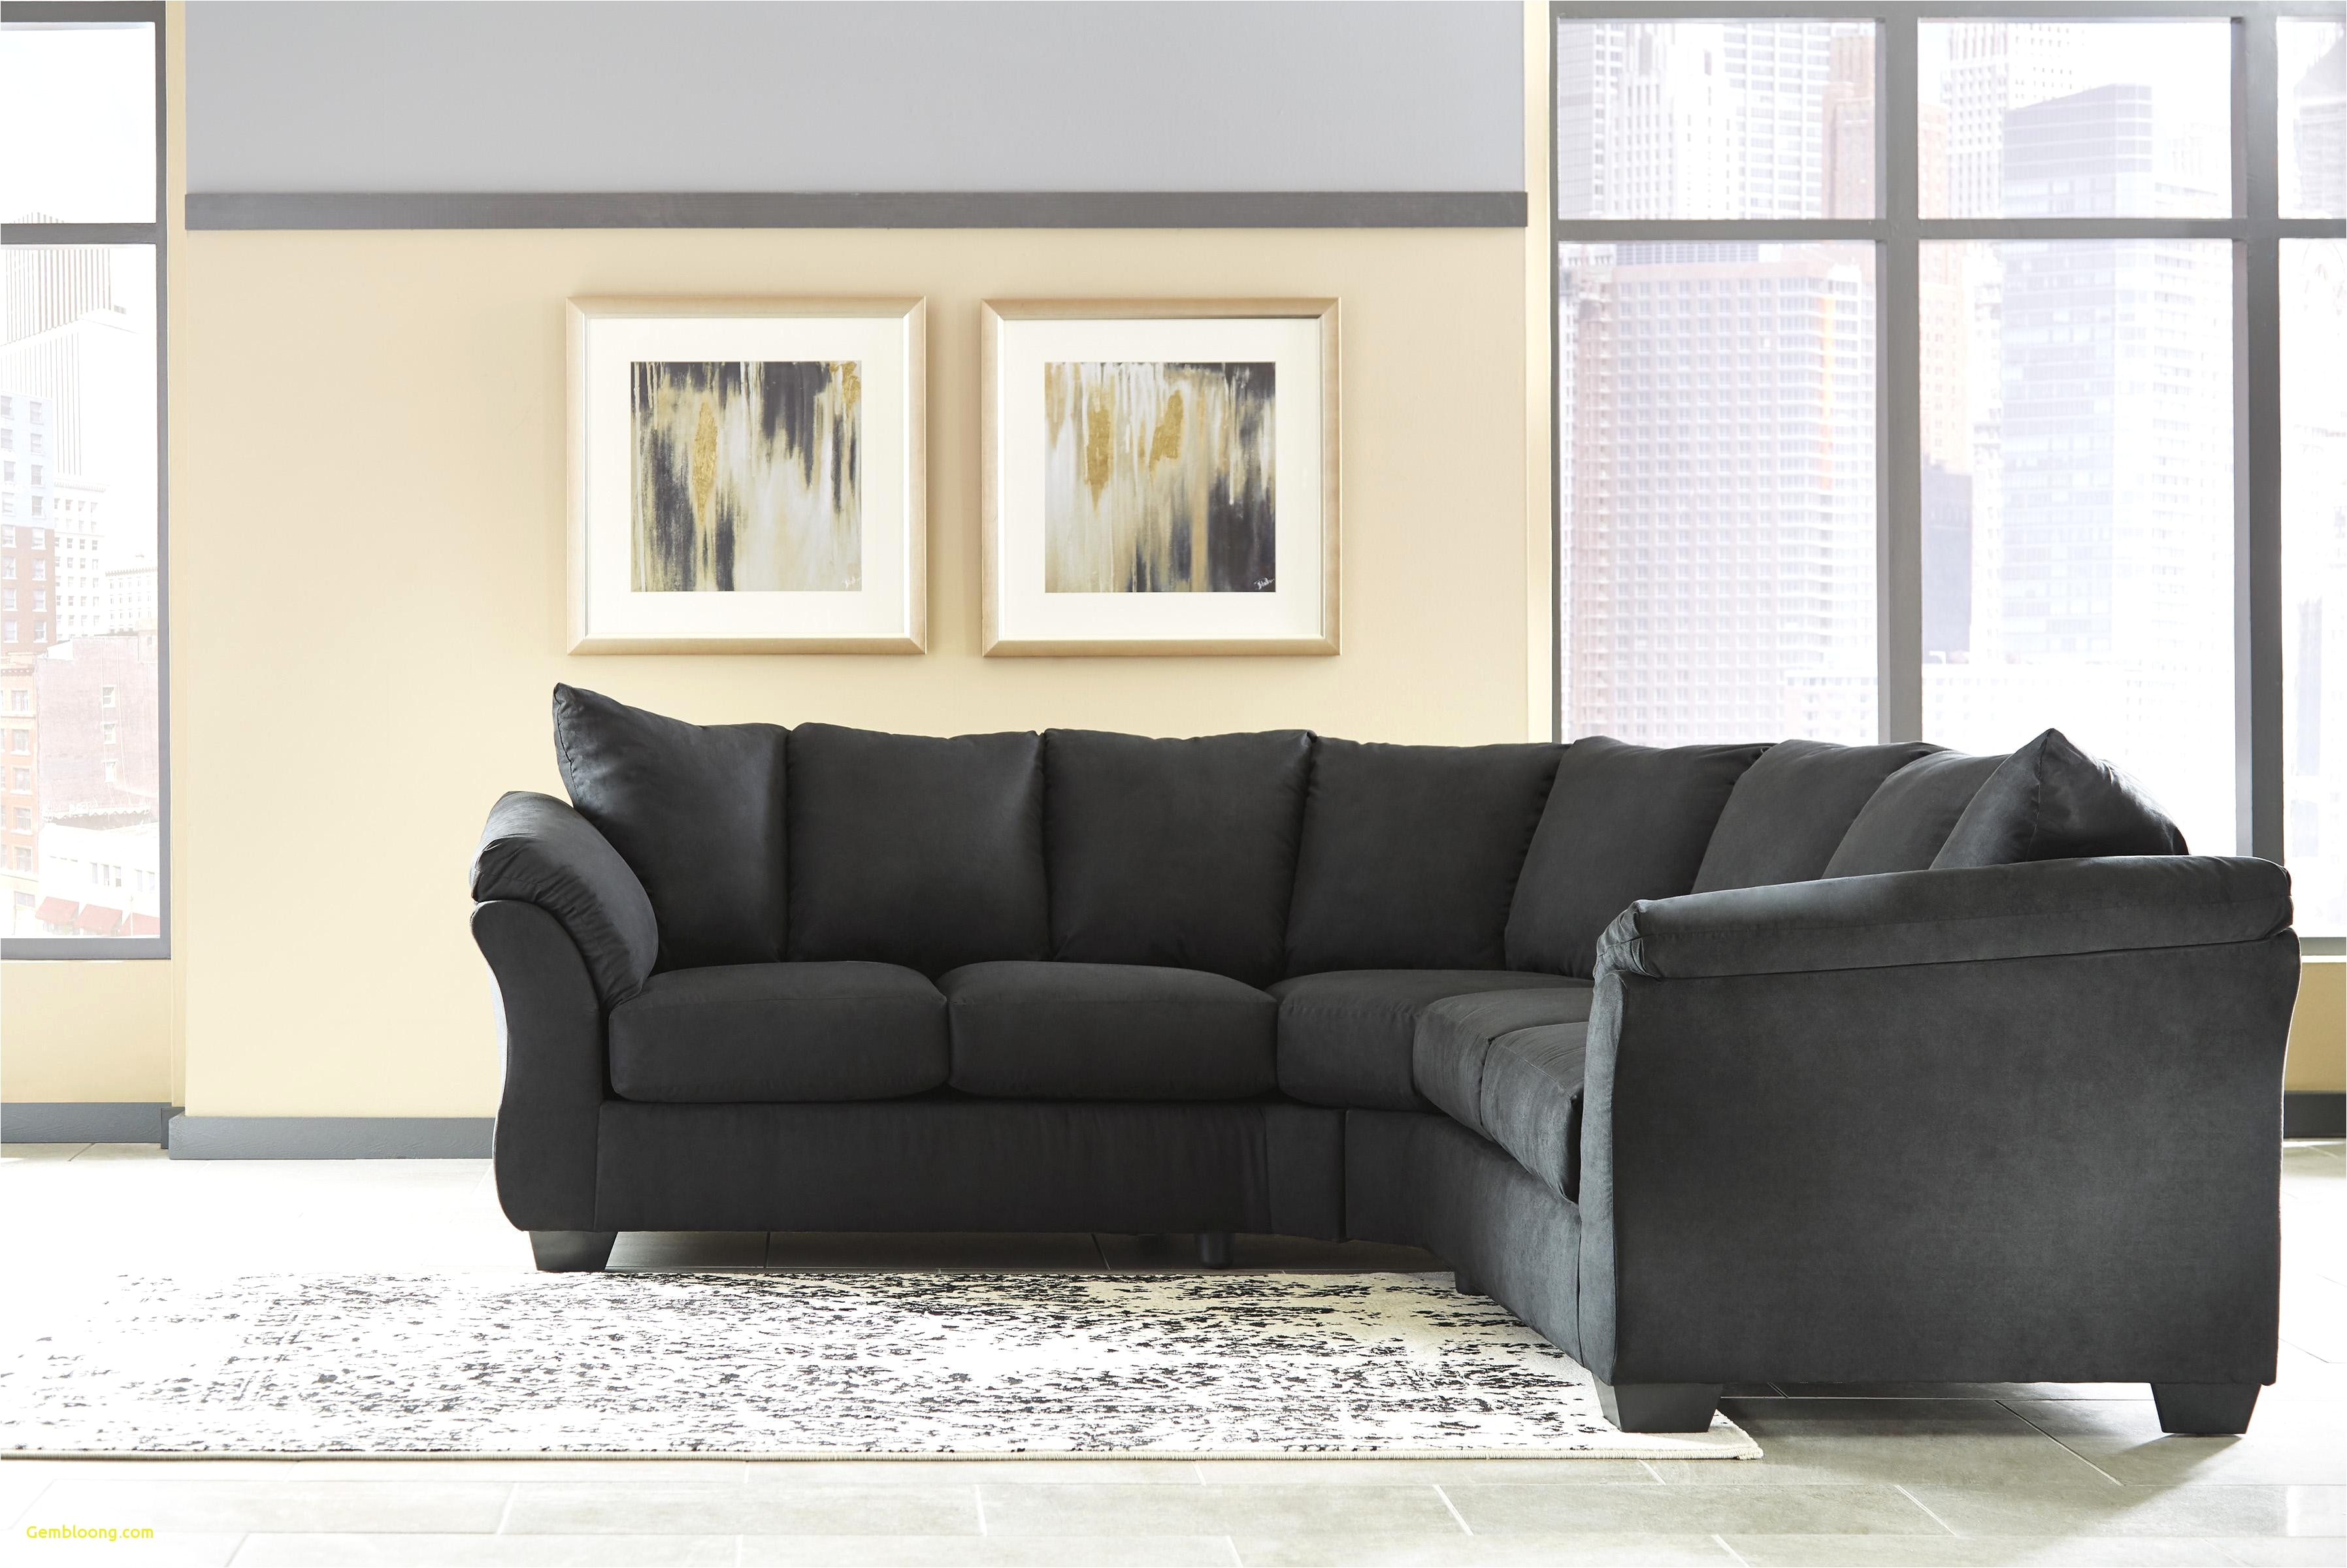 ergonomic living room chairs beautiful sectional couch 0d tags fabulous new sectional couch magnificent